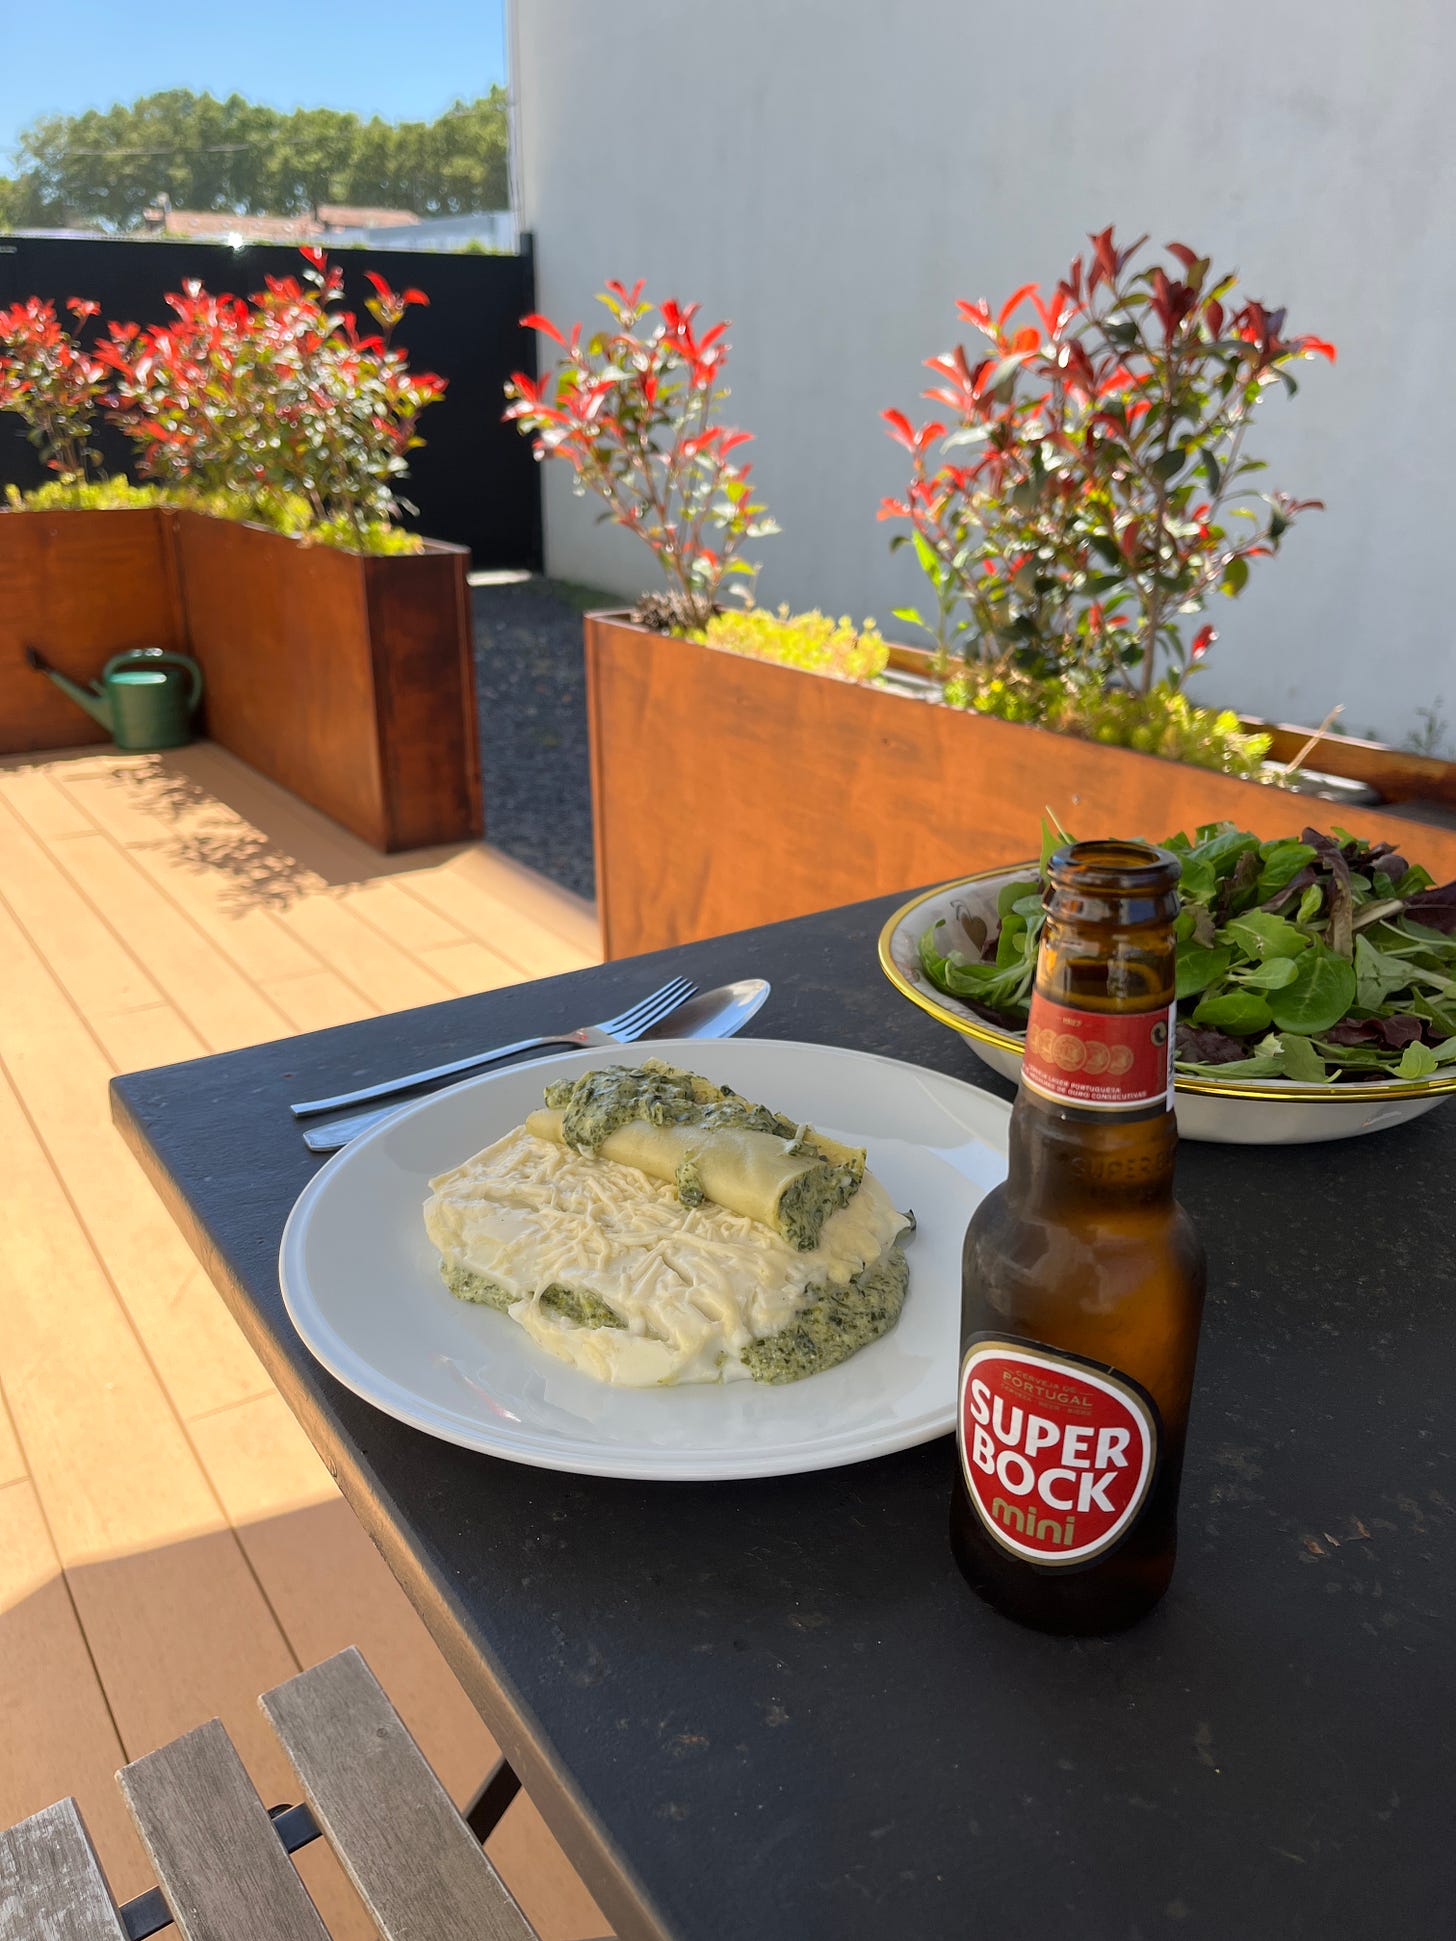 Image: photo of a plate of vegetarian lasagna, a big bowl of salad, and two mini bottles of Superbock (Portugal beer) on the patio table.